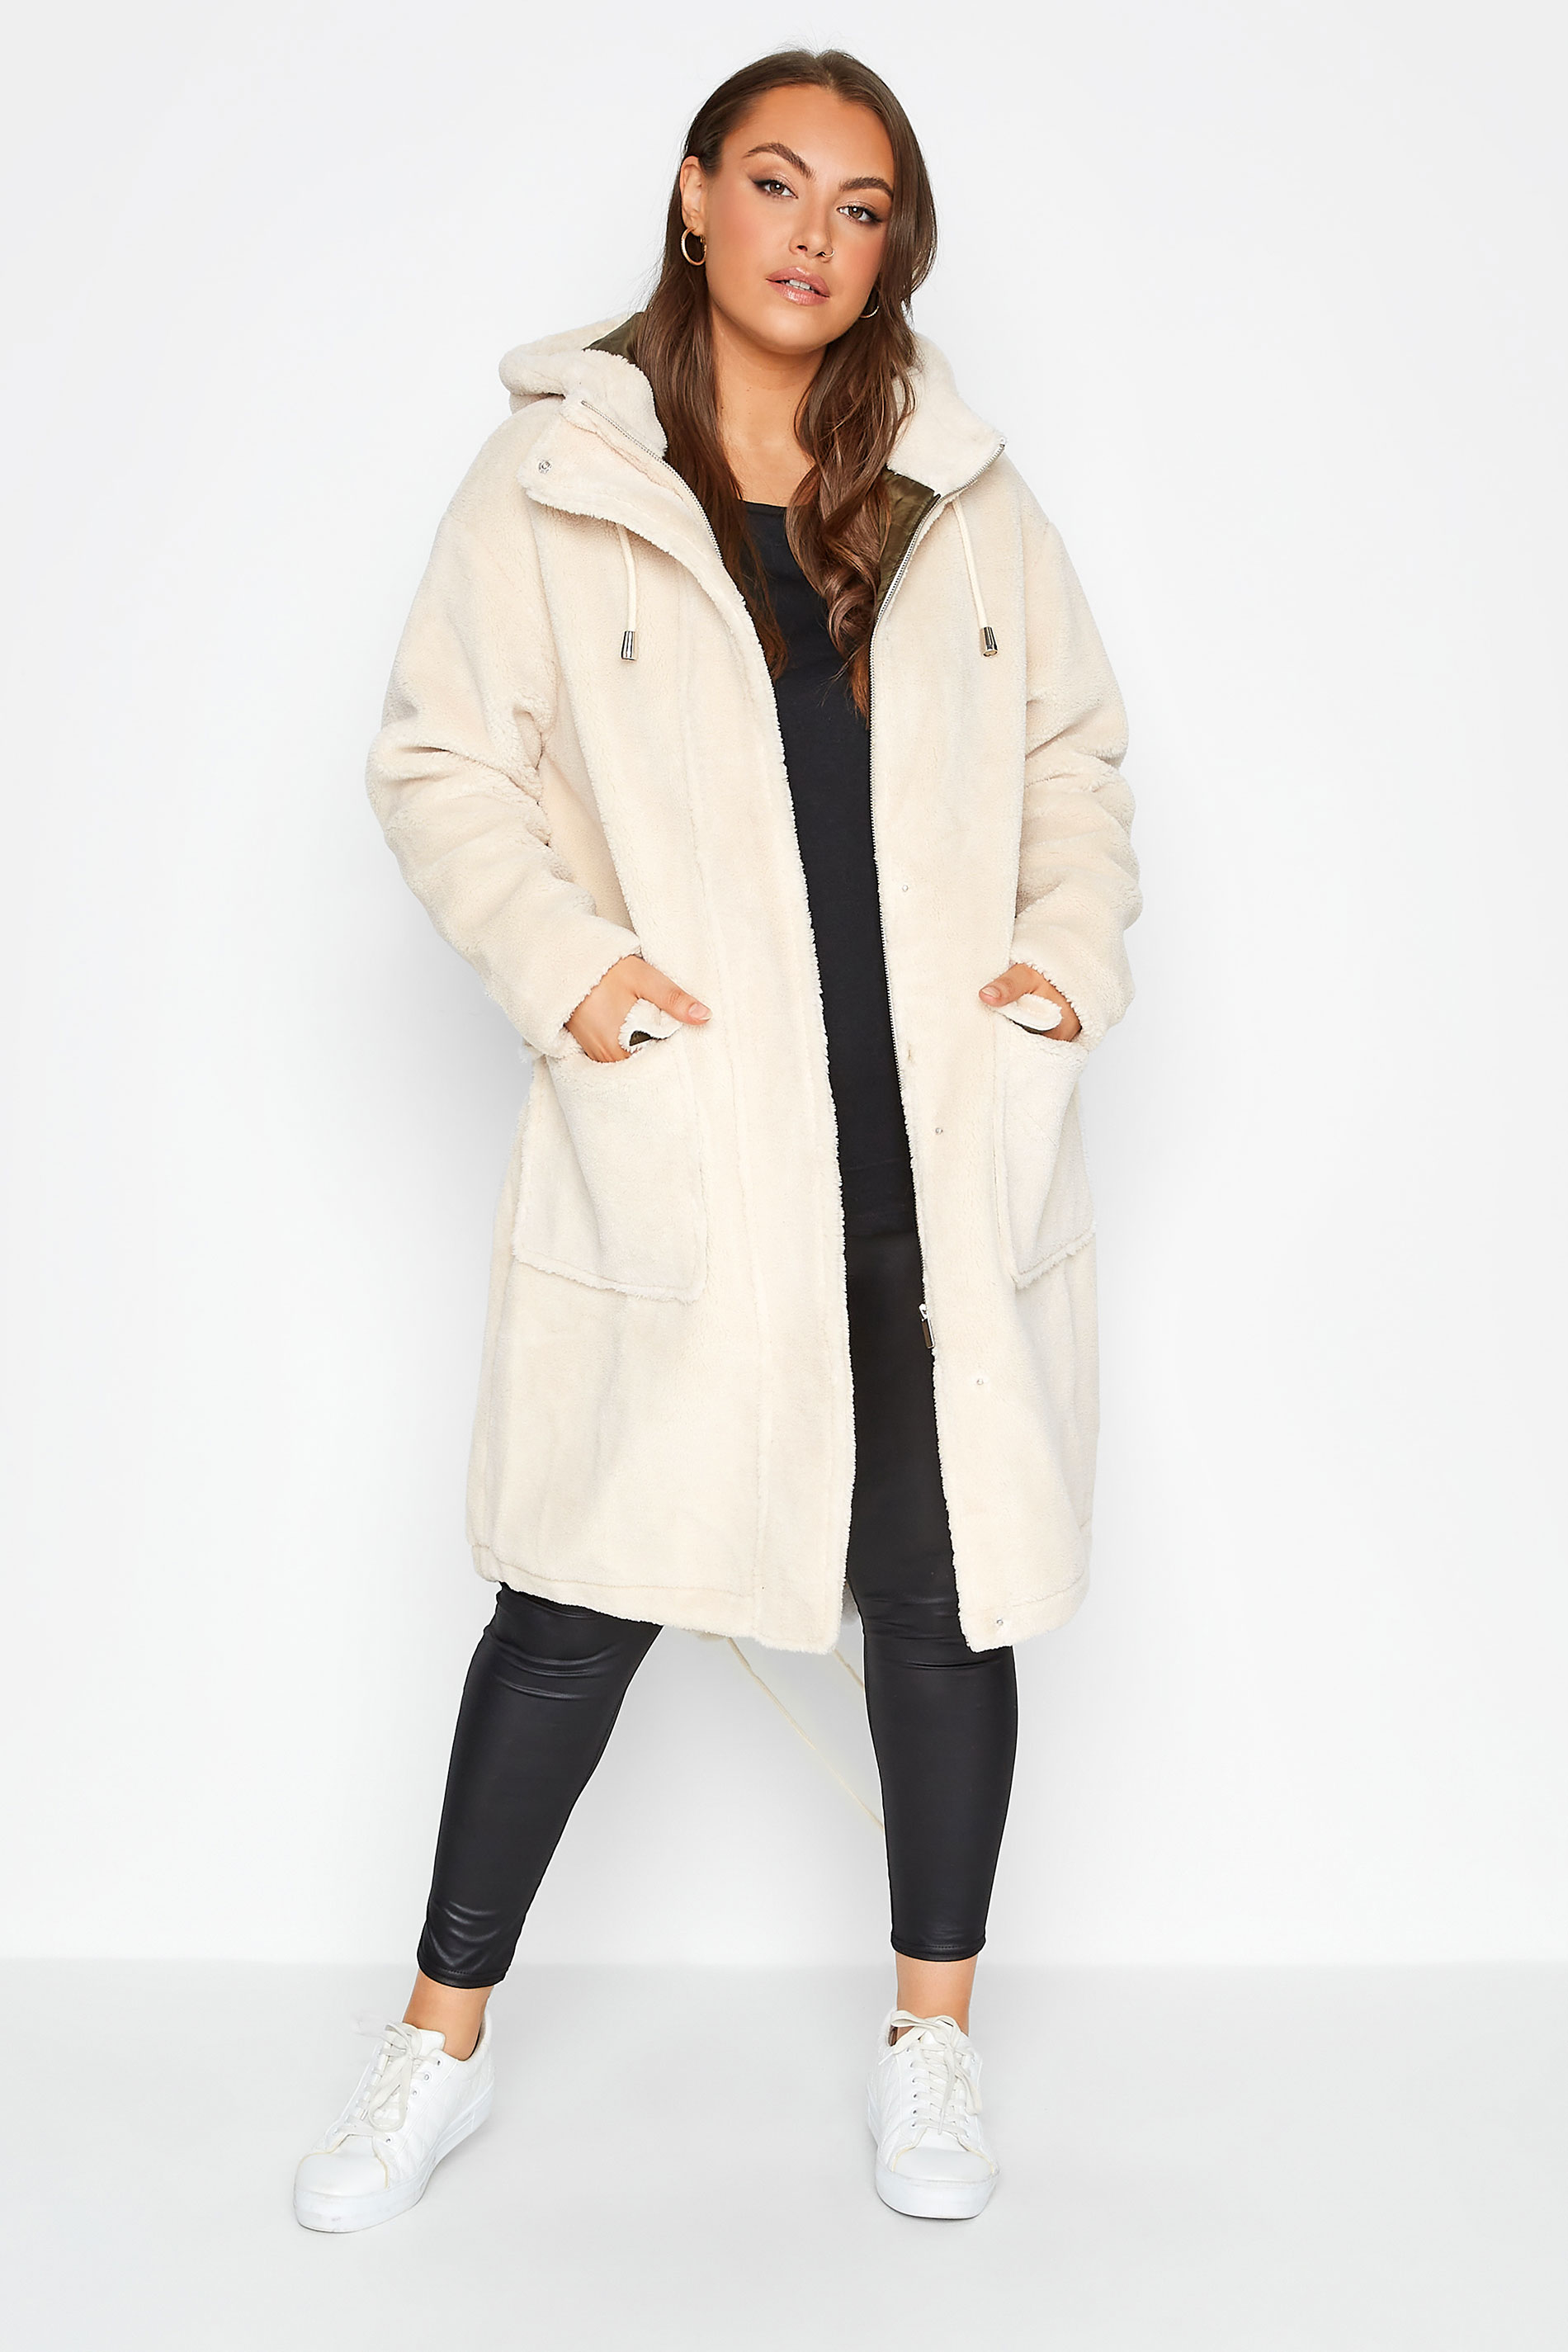 LIMITED COLLECTION Plus Size Cream Teddy Longline Parka Coat | Yours Clothing 1